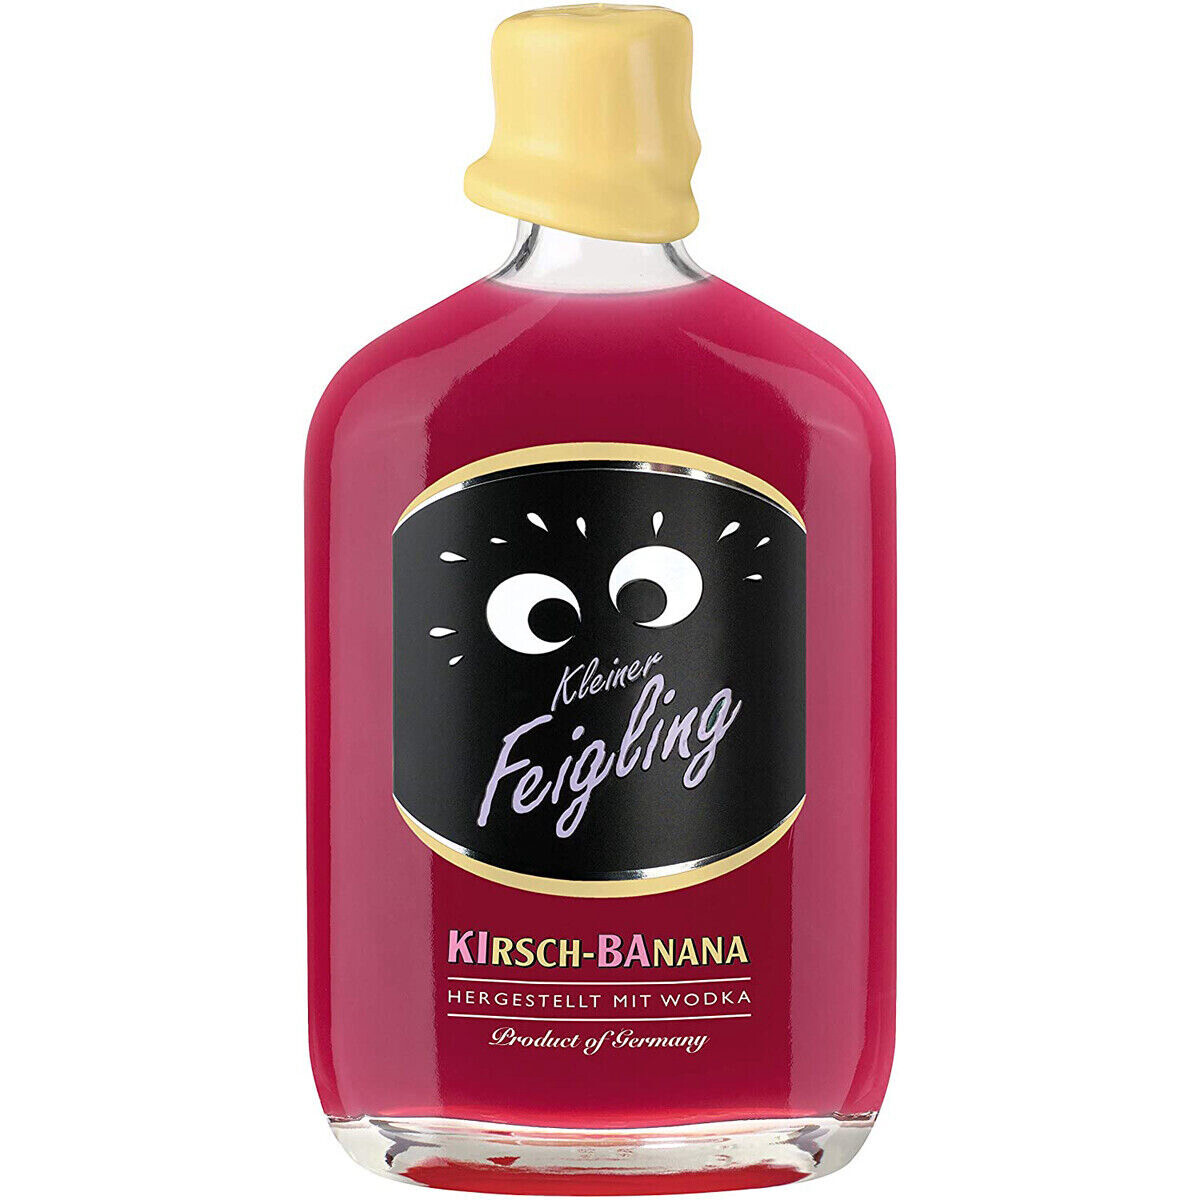 Kleiner Feigling Kirsch Banana Product of Germany 500 ml 